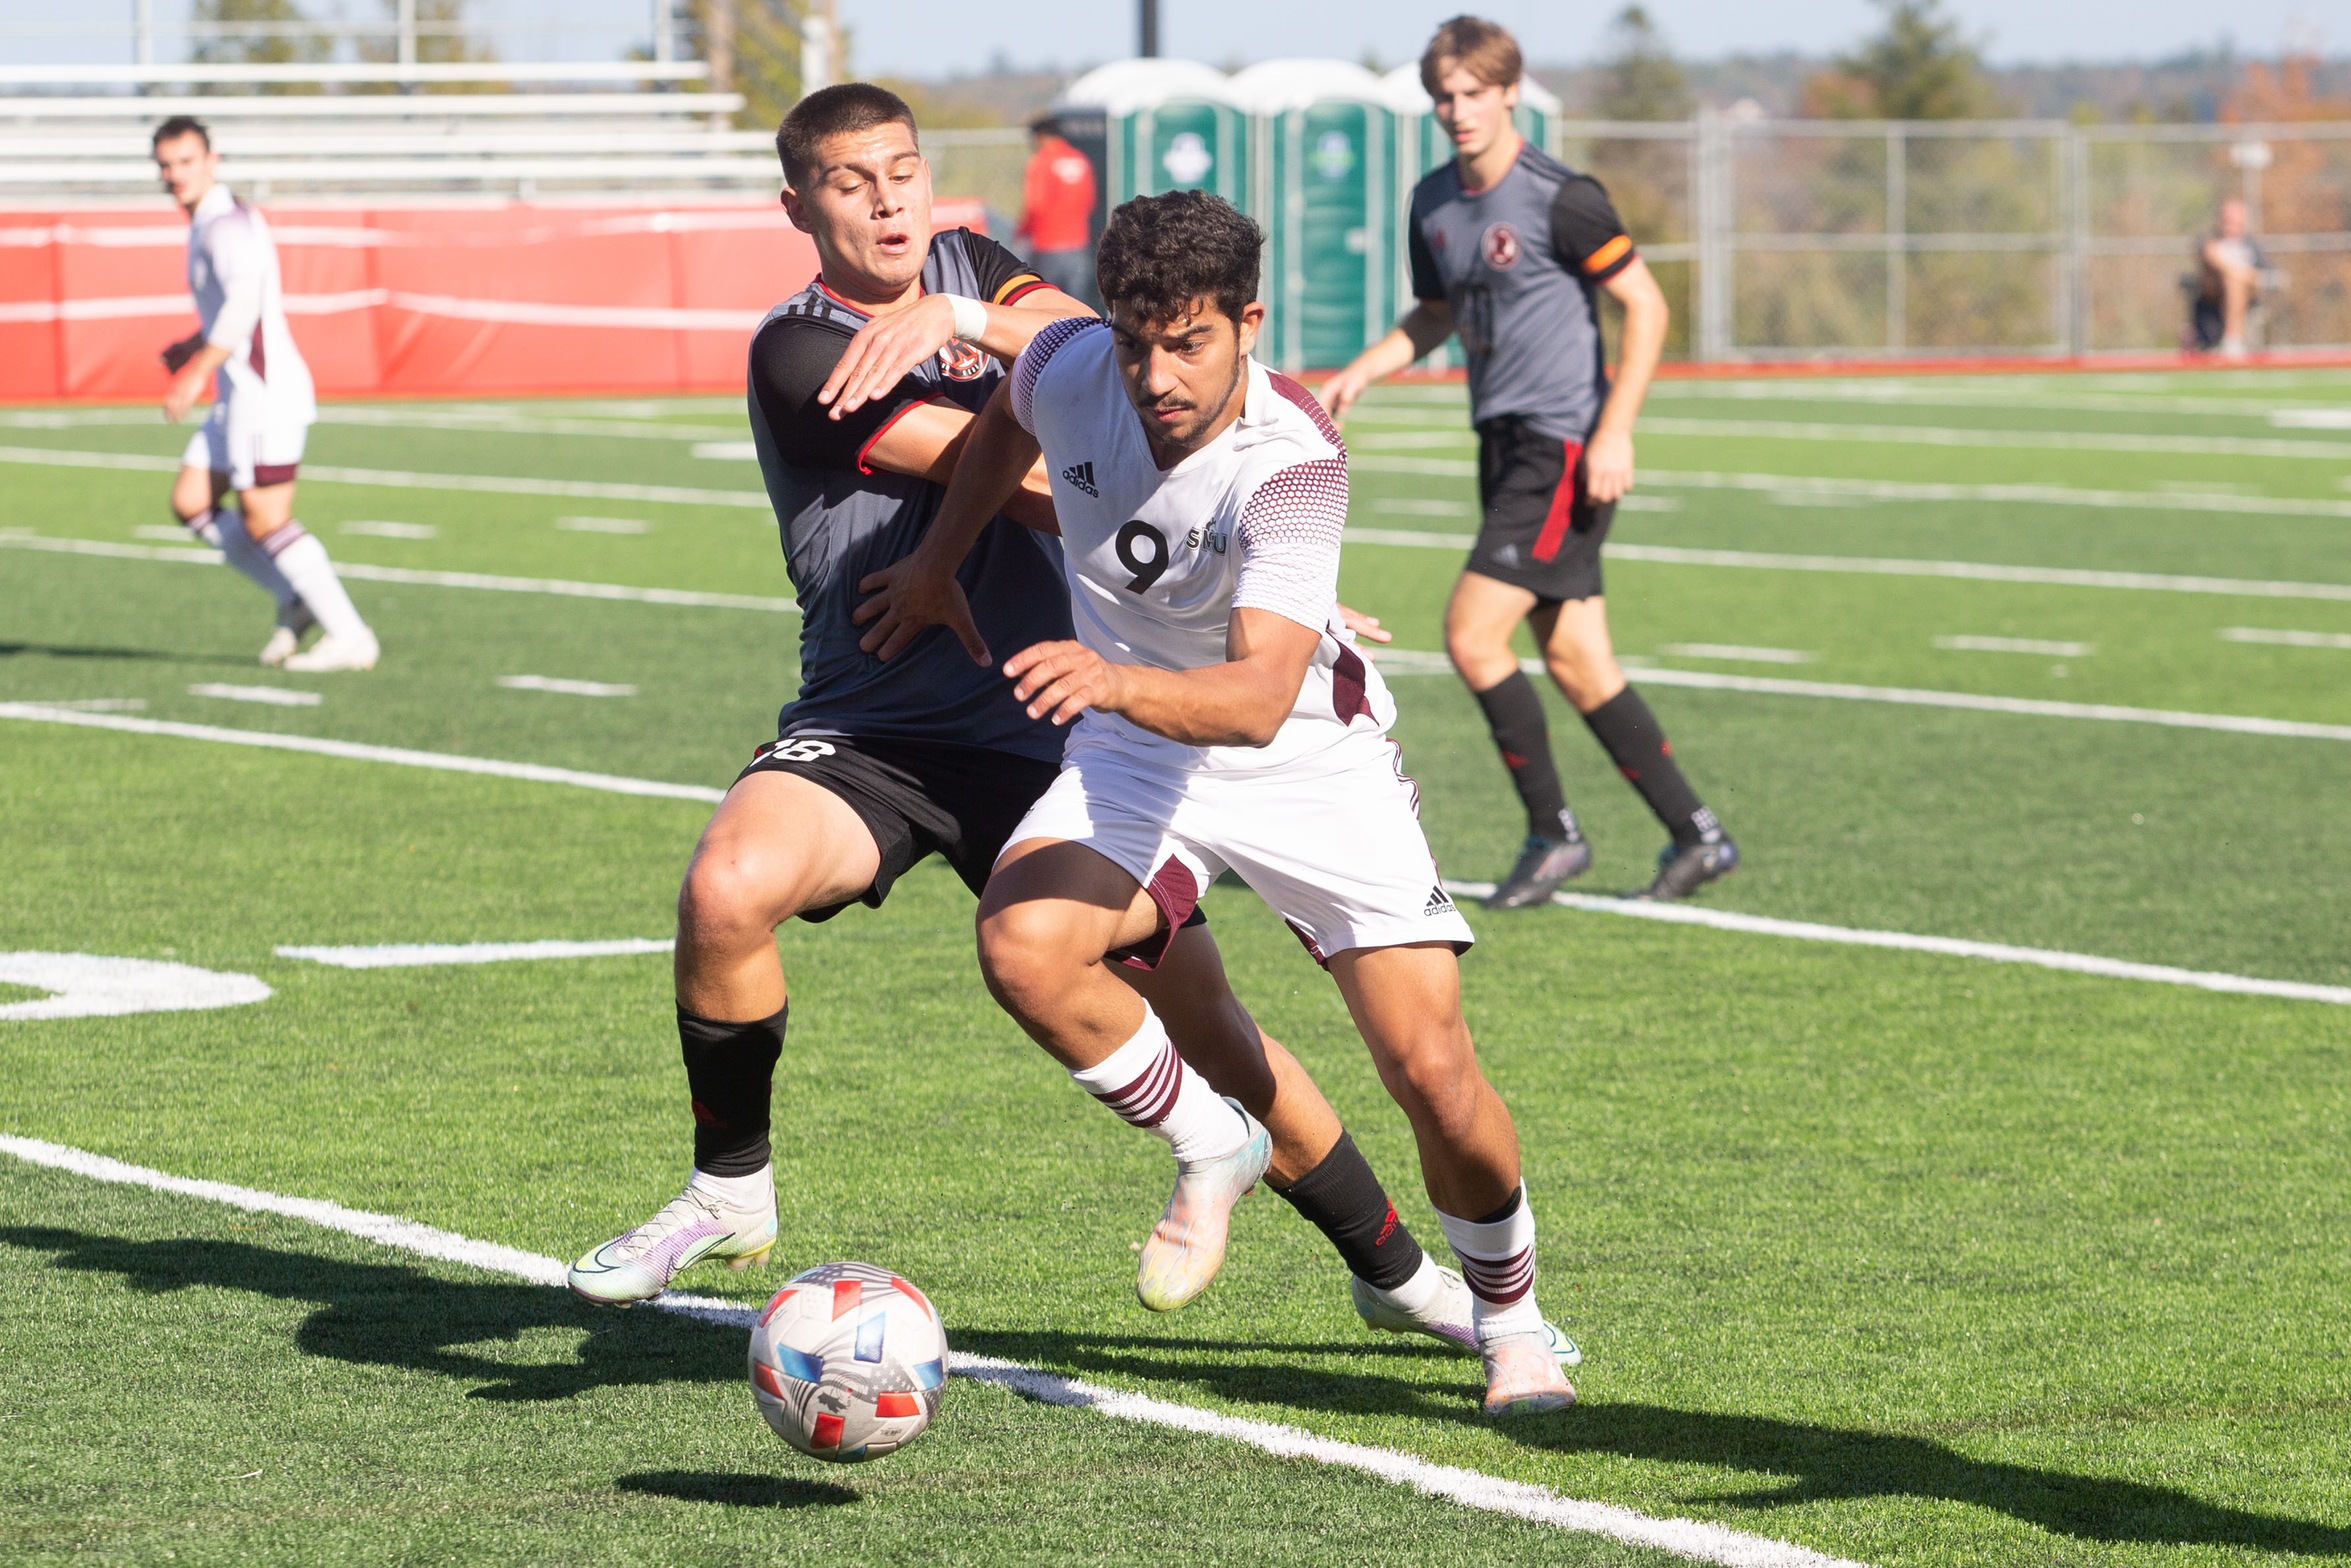 Huskies forward Ahmed Ibrahim (#9) dribbles away from a UNB REDS defender during the Huskies 1-0 win on Oct. 1, 2022 in Fredericton, NB. (Photo courtesy: James West / UNB Athletics)